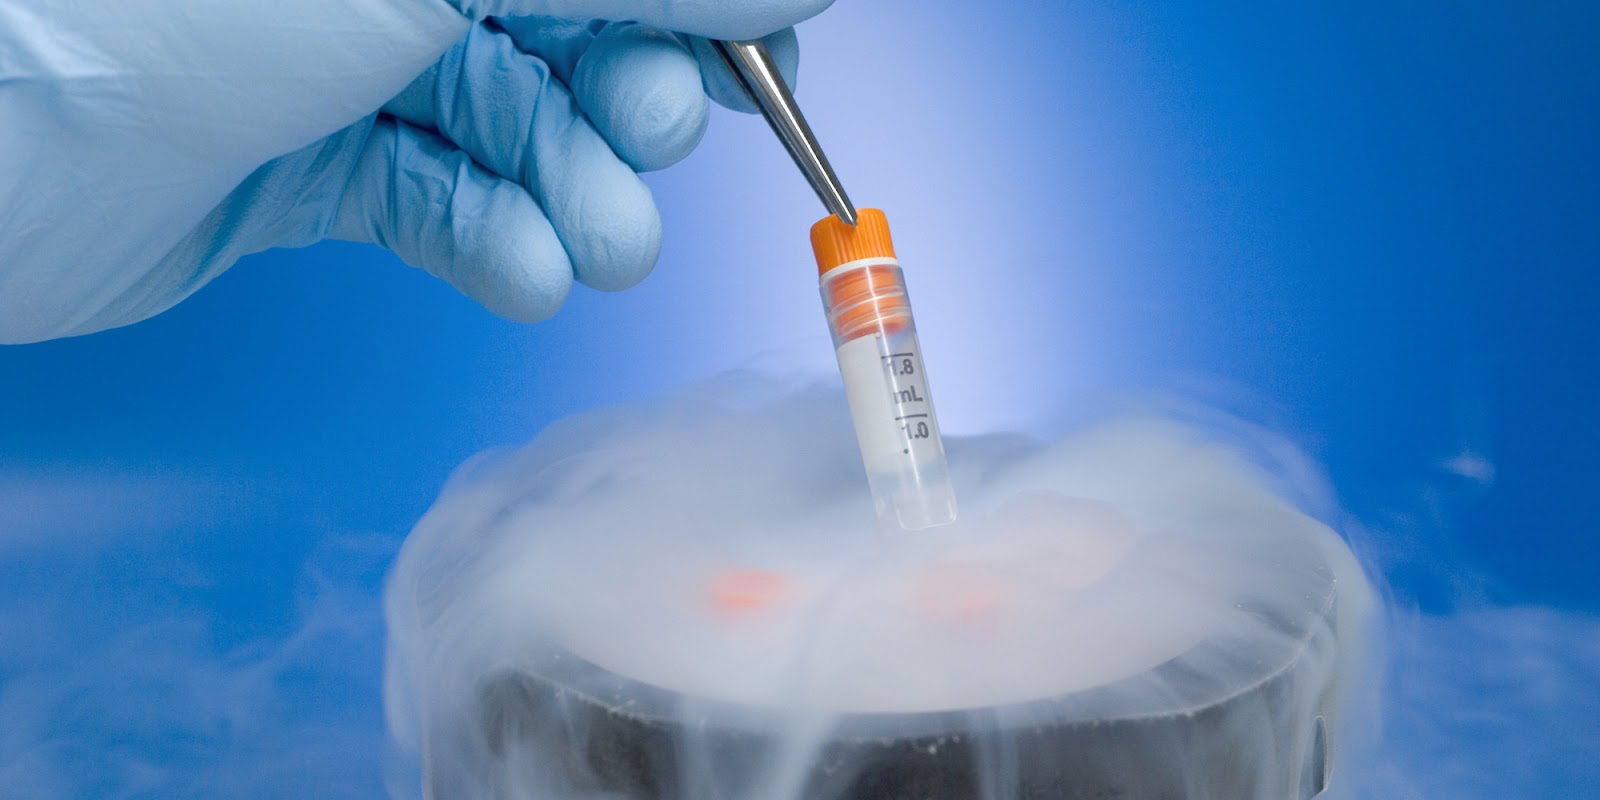 ART of Egg Freezing: Freeze for your own Future